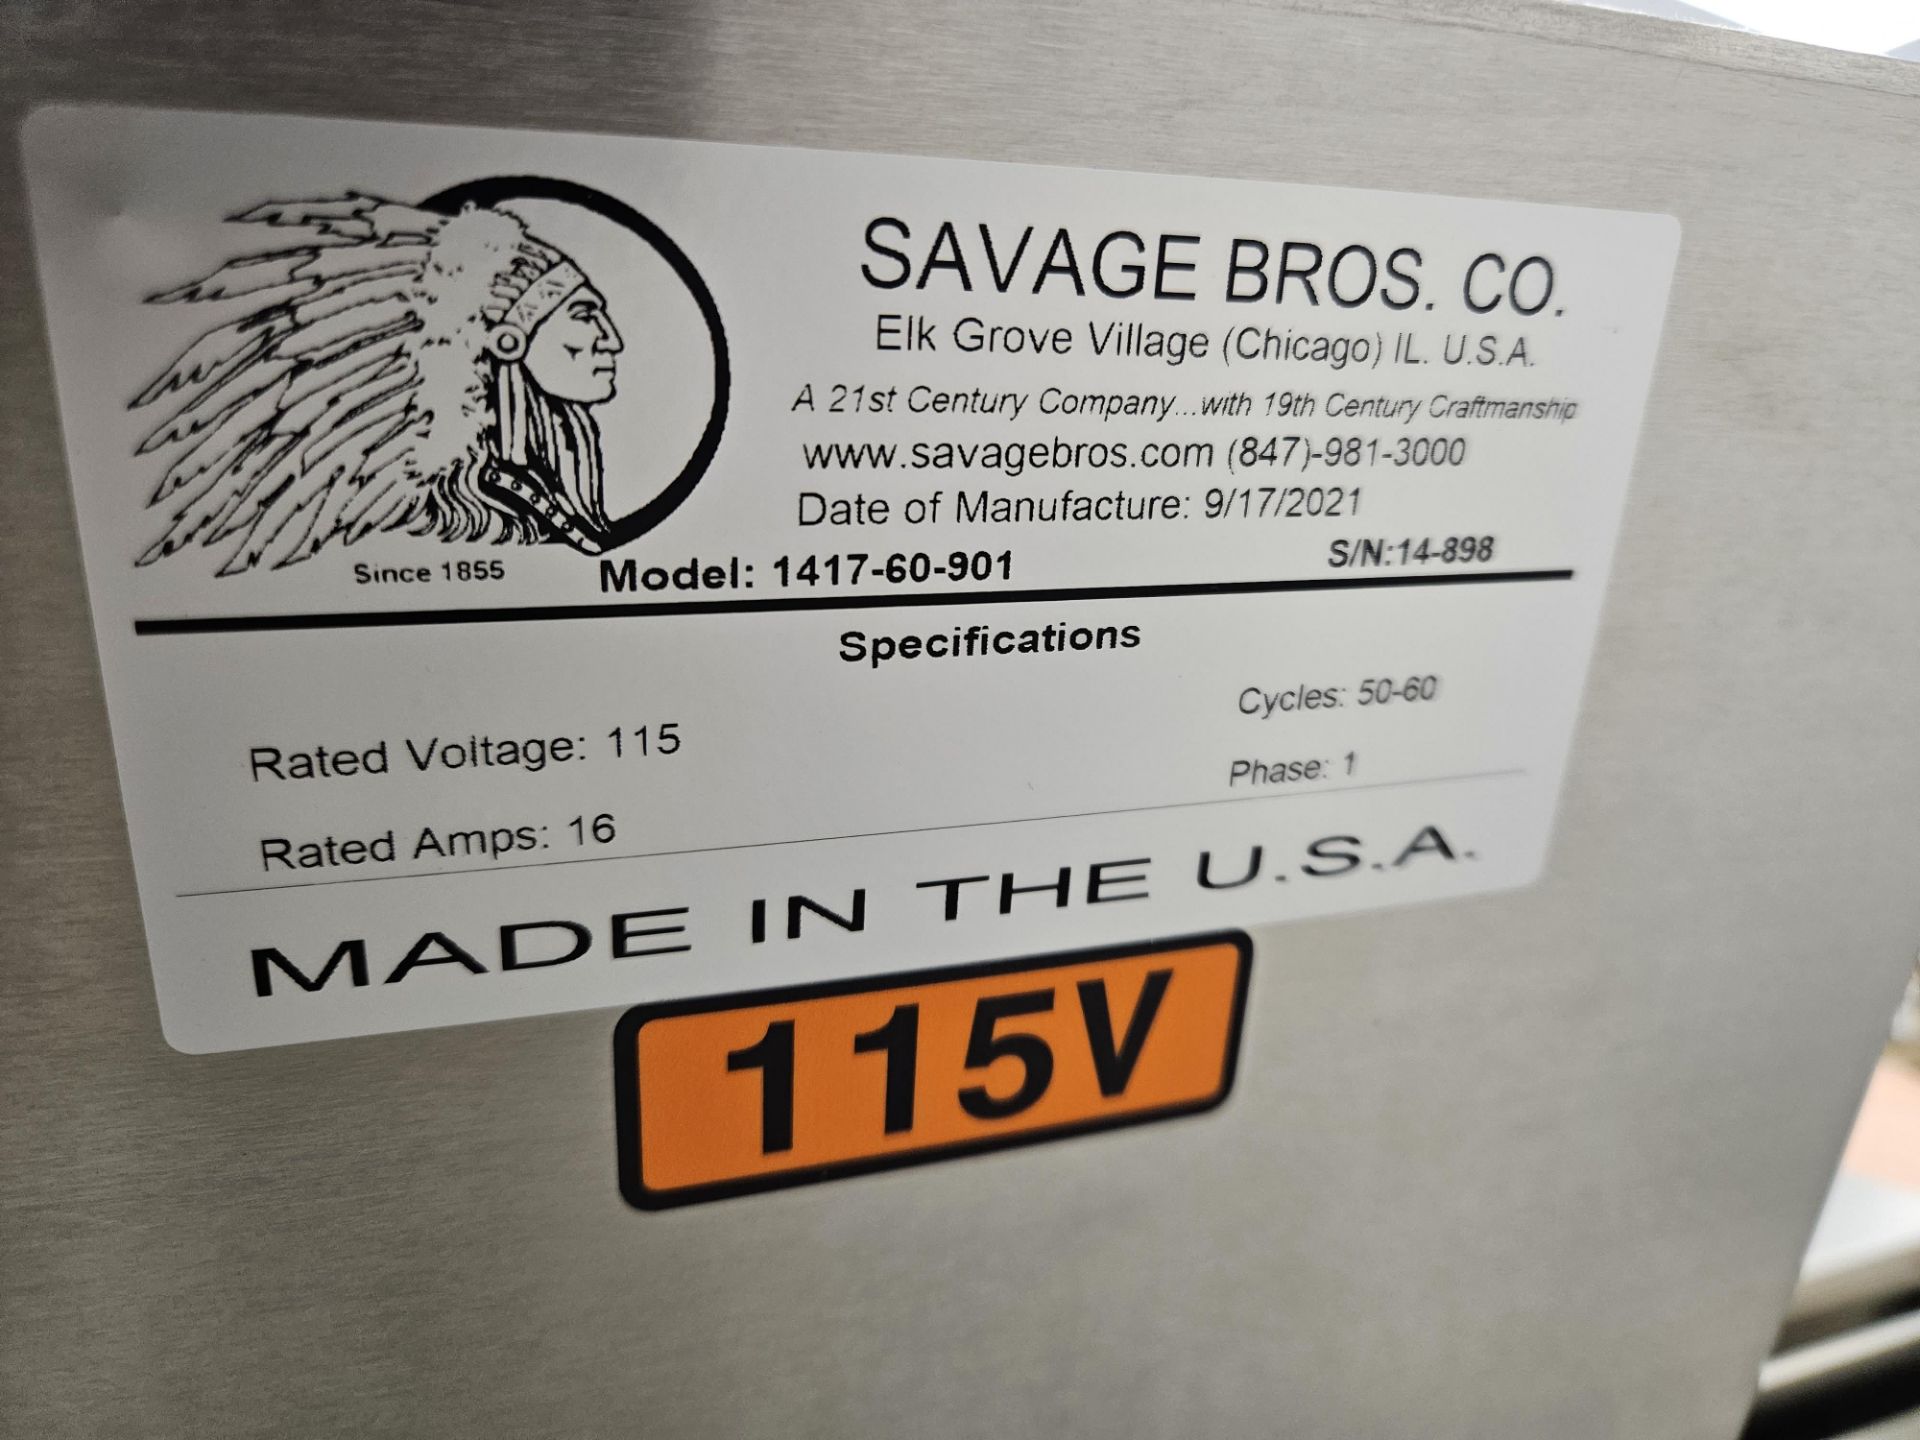 Used Savage Bros 125 Lb Chocolate Tempering & Molding Workstation - Image 7 of 8